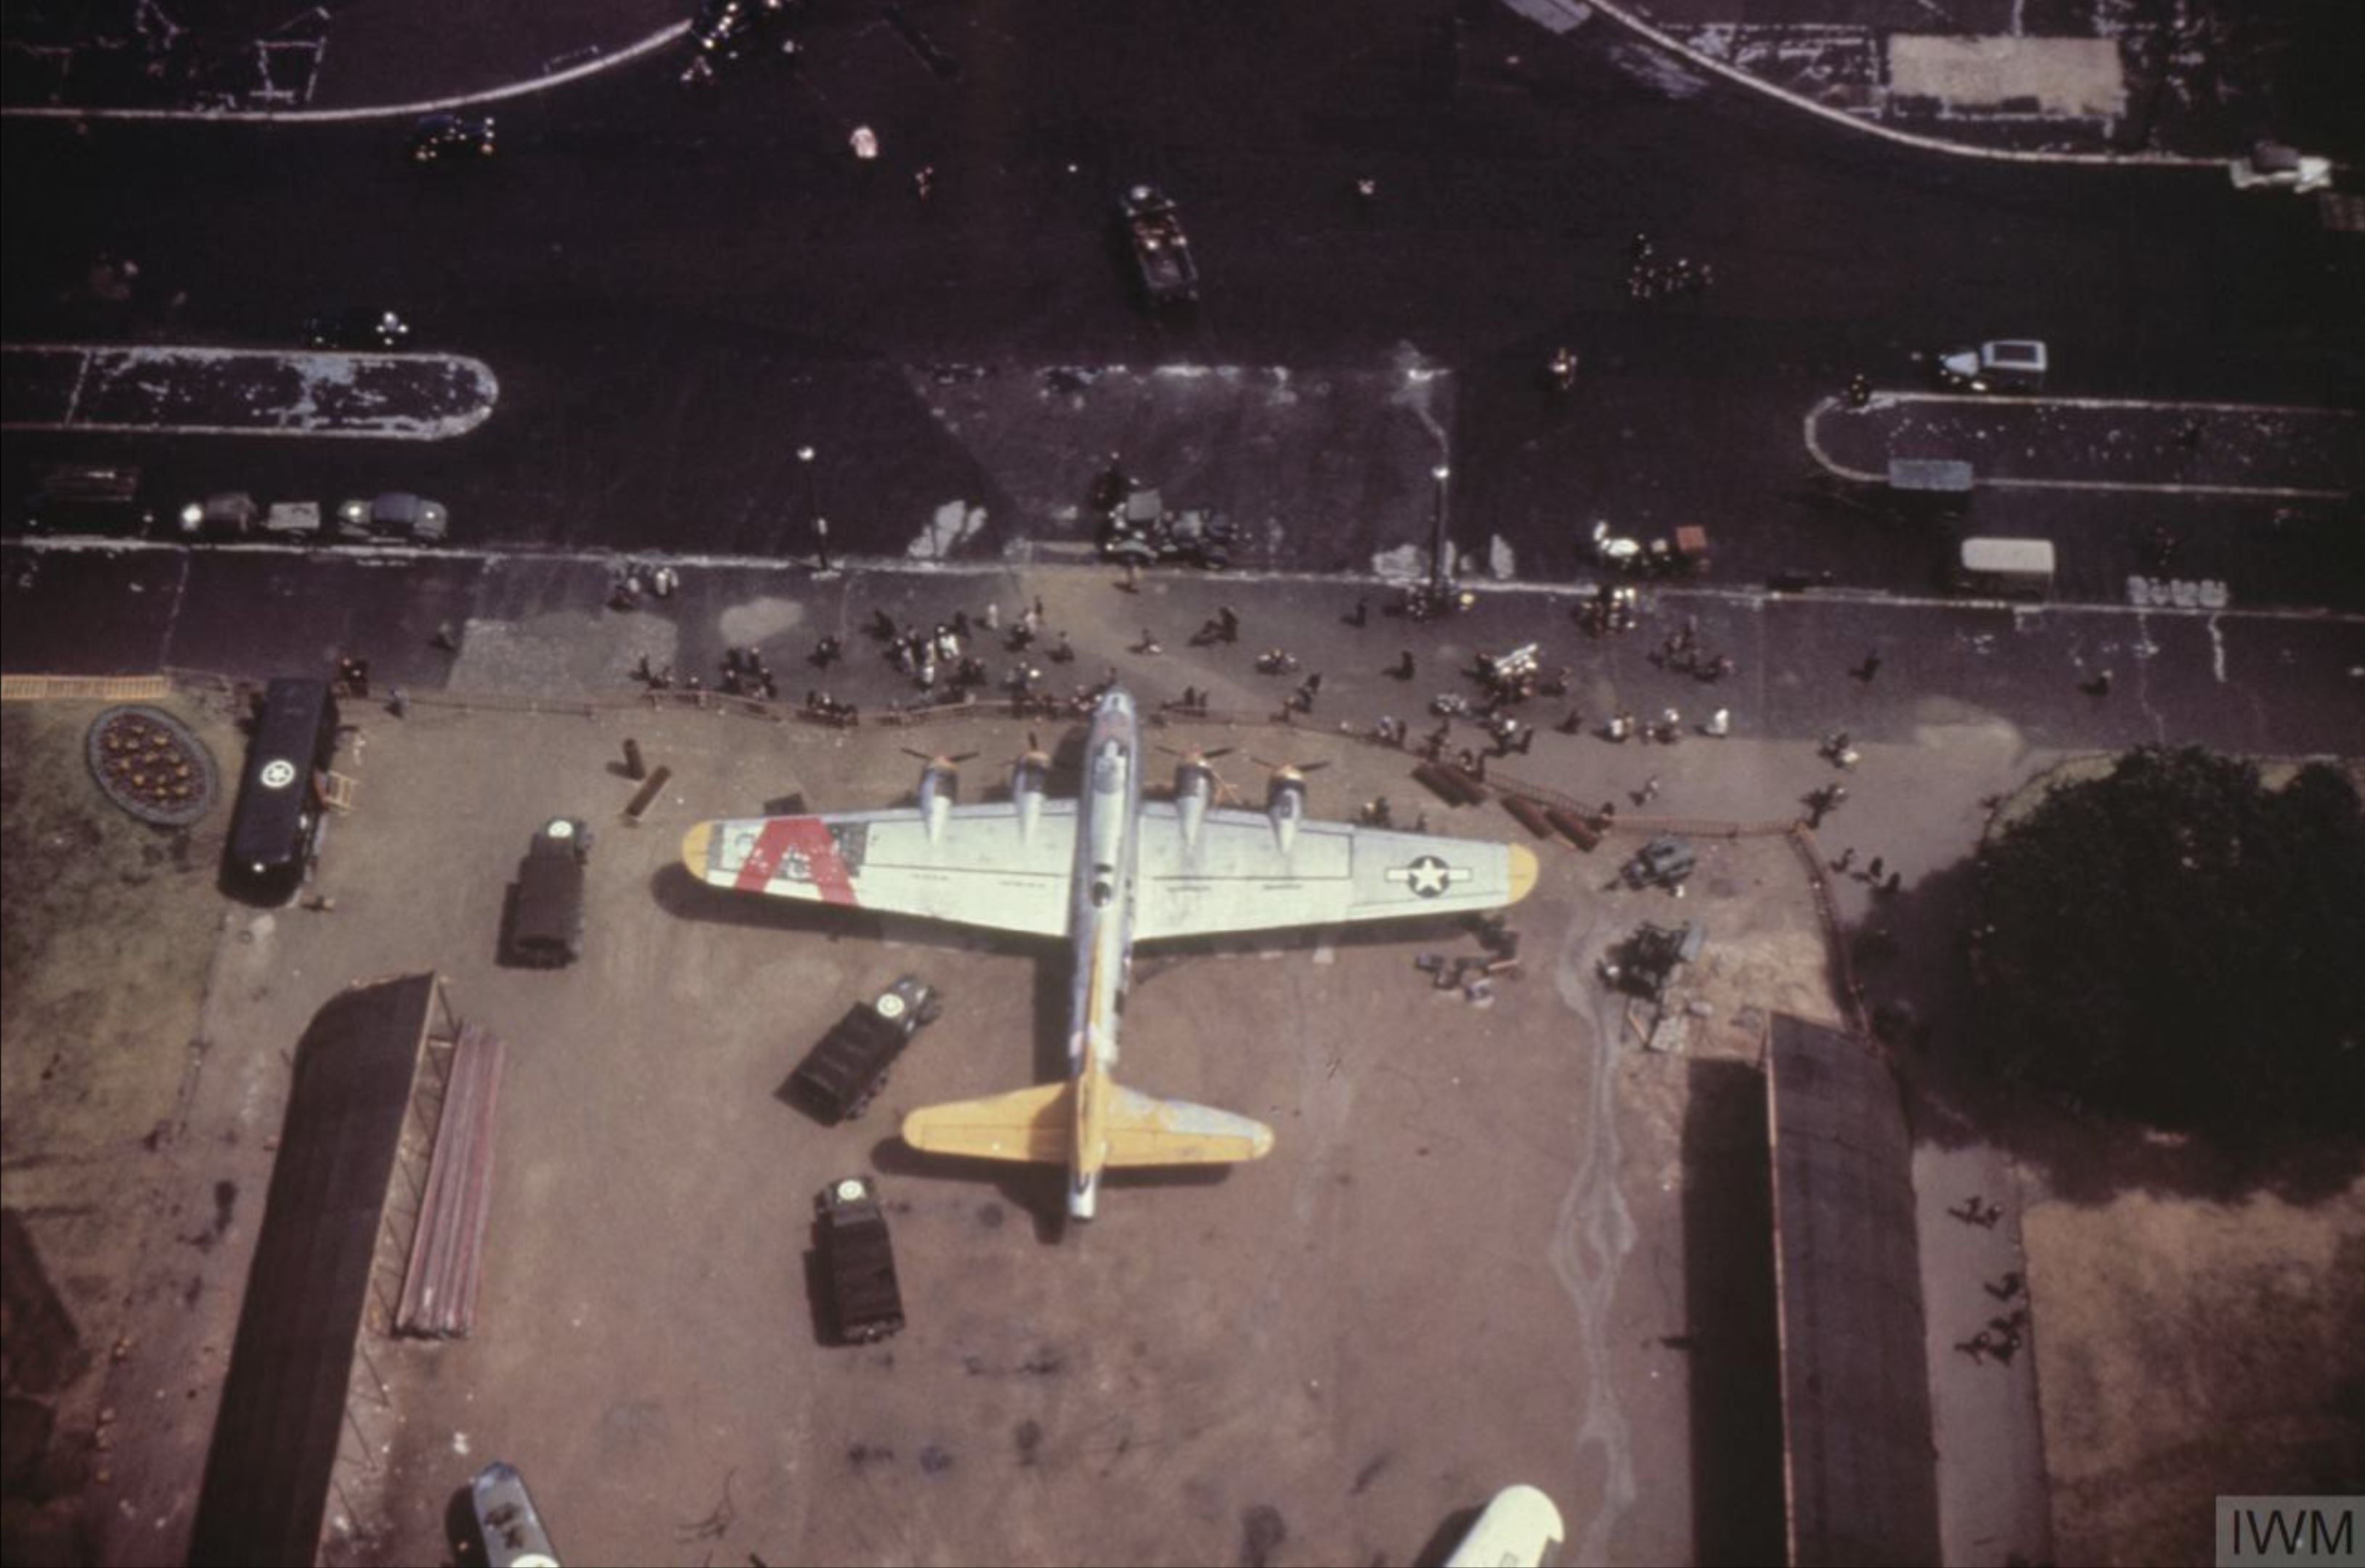 Boeing B 17G Fortress exhibited under the Eiffel Tower Paris 1945 FRE5826